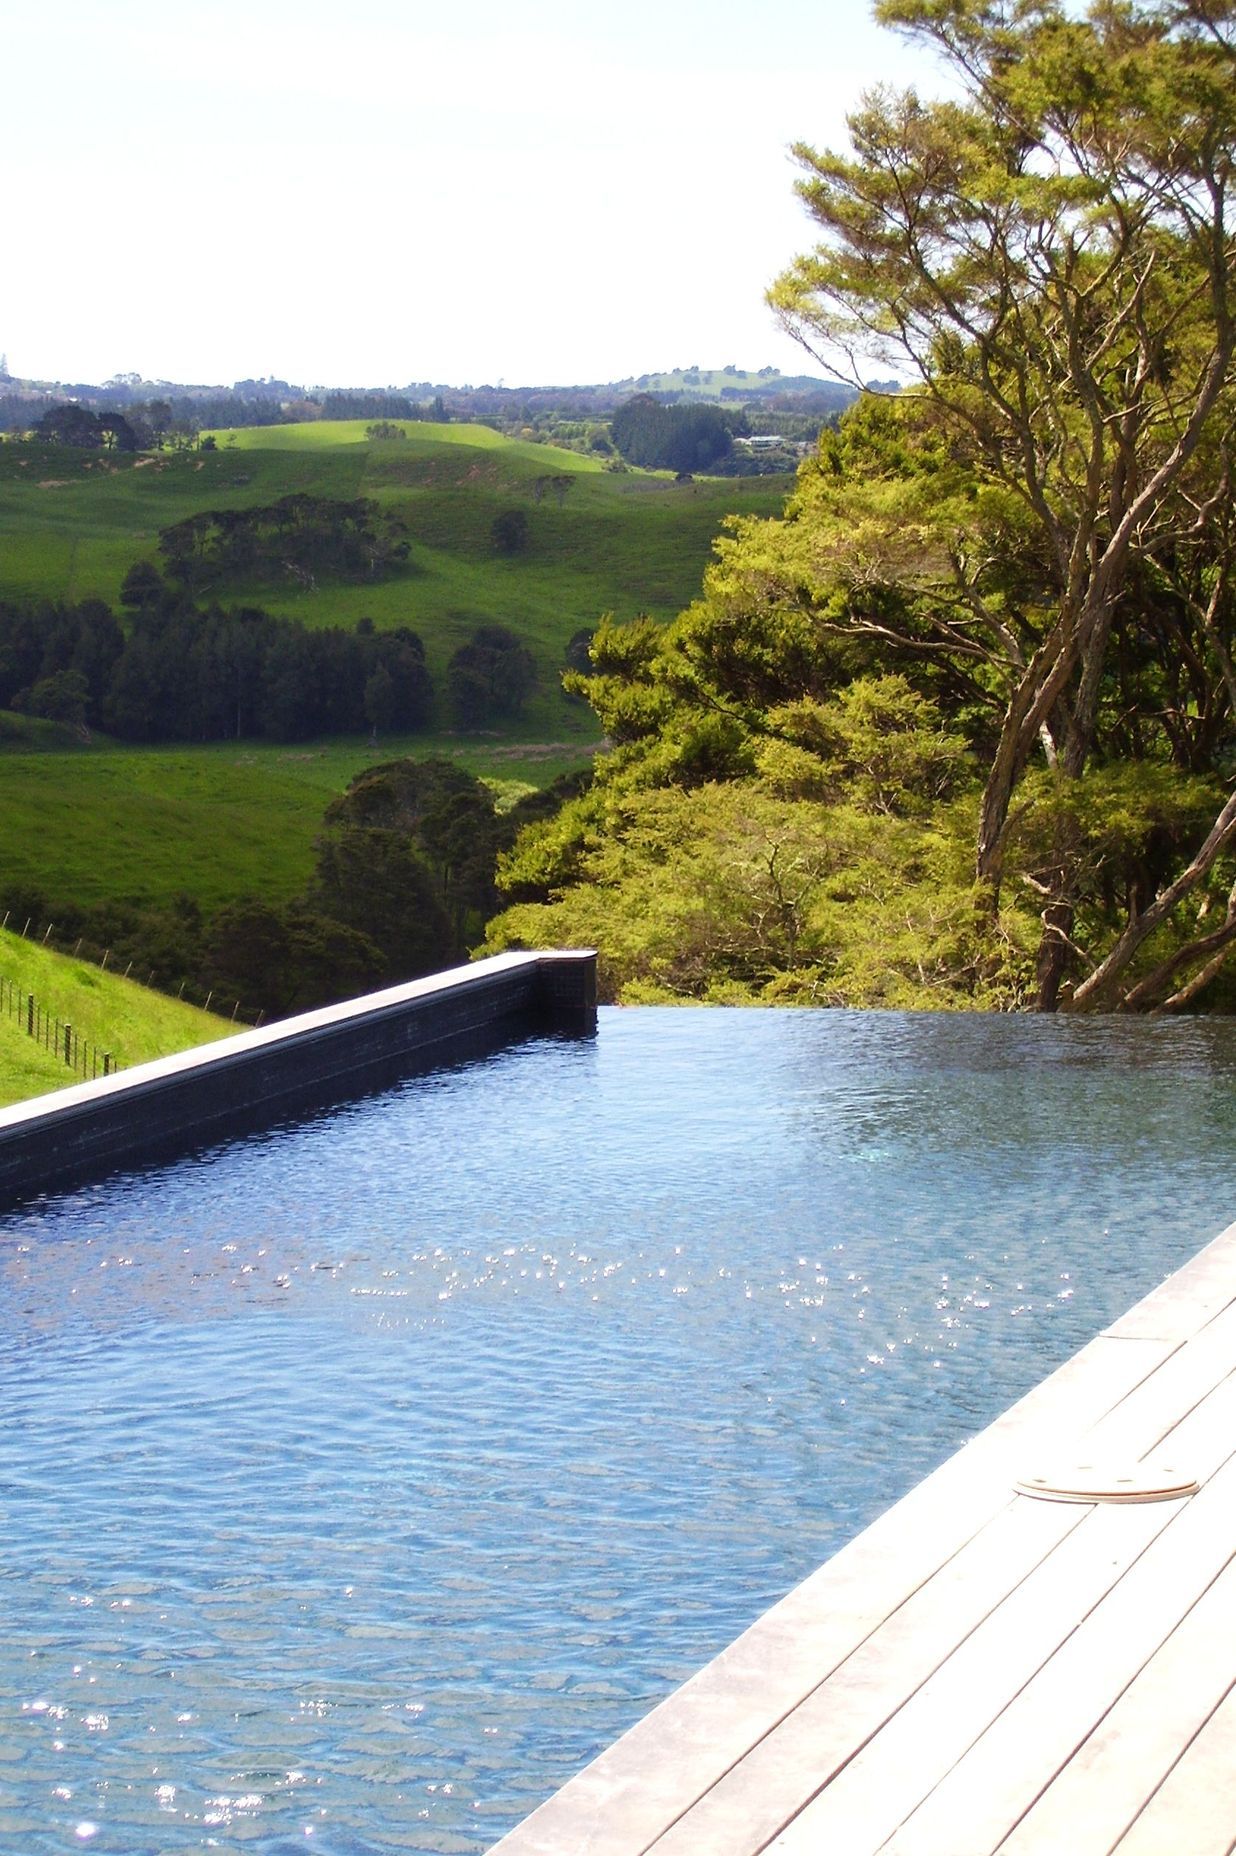 SUSTAINABLE COUNTRY HOUSE, NORTH WAIKATO